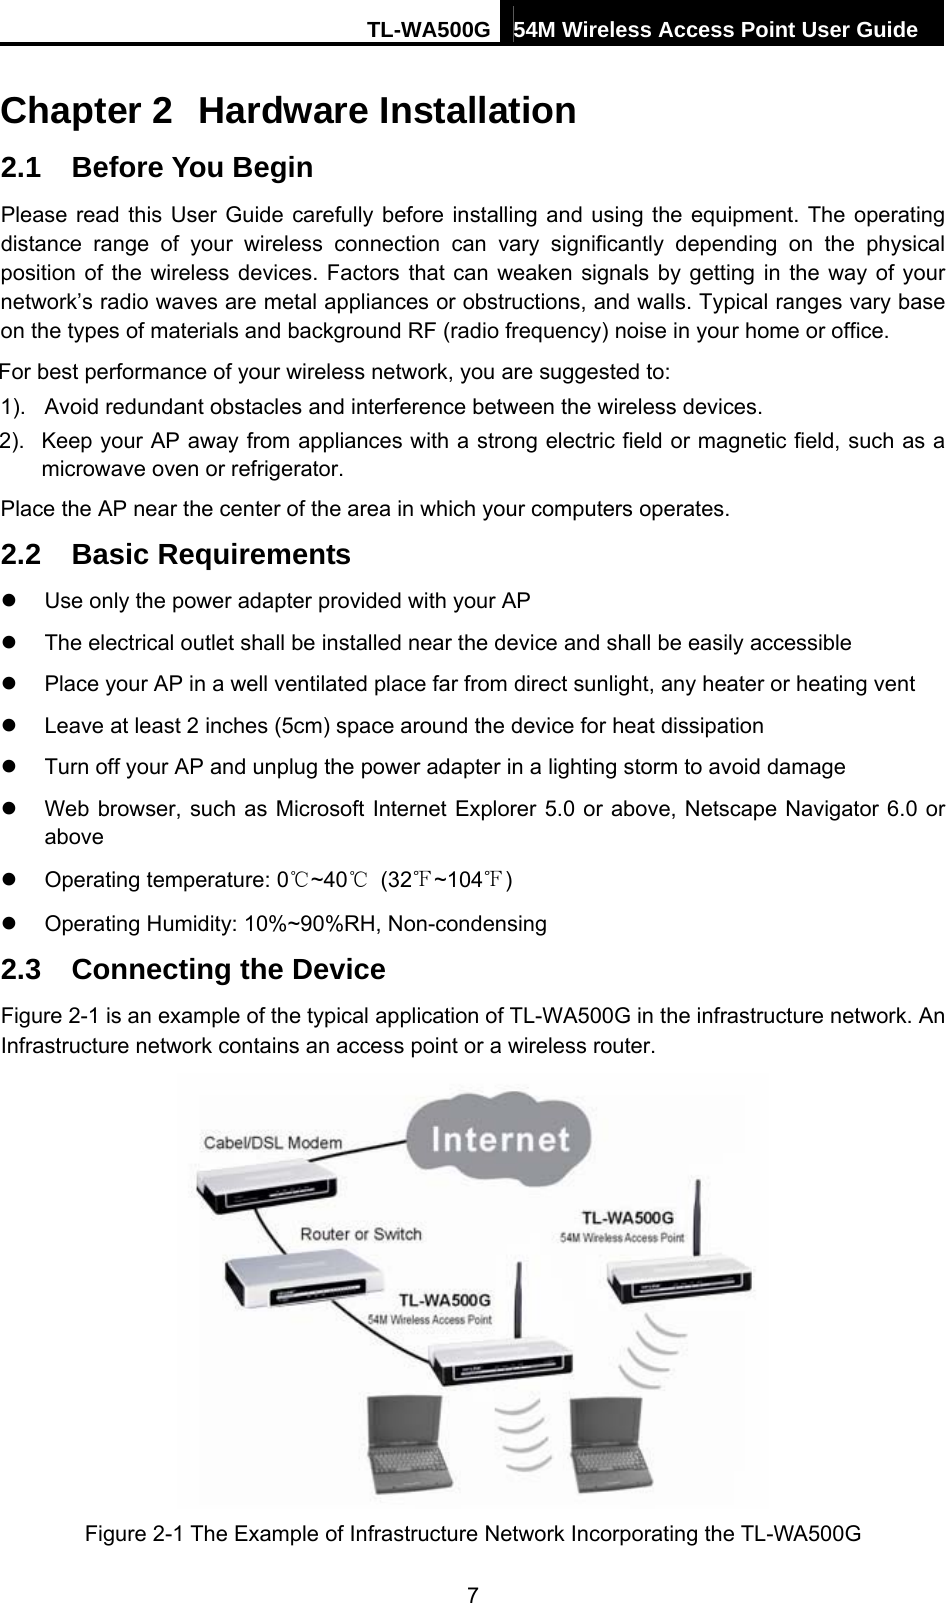 TL-WA500G 54M Wireless Access Point User Guide  Chapter 2  Hardware Installation 2.1  Before You Begin Please read this User Guide carefully before installing and using the equipment. The operating distance range of your wireless connection can vary significantly depending on the physical position of the wireless devices. Factors that can weaken signals by getting in the way of your network’s radio waves are metal appliances or obstructions, and walls. Typical ranges vary base on the types of materials and background RF (radio frequency) noise in your home or office. For best performance of your wireless network, you are suggested to: 1).  Avoid redundant obstacles and interference between the wireless devices.   2).  Keep your AP away from appliances with a strong electric field or magnetic field, such as a microwave oven or refrigerator. Place the AP near the center of the area in which your computers operates. 2.2  Basic Requirements z  Use only the power adapter provided with your AP   z  The electrical outlet shall be installed near the device and shall be easily accessible z  Place your AP in a well ventilated place far from direct sunlight, any heater or heating vent z  Leave at least 2 inches (5cm) space around the device for heat dissipation z  Turn off your AP and unplug the power adapter in a lighting storm to avoid damage z  Web browser, such as Microsoft Internet Explorer 5.0 or above, Netscape Navigator 6.0 or above z  Operating temperature: 0℃~40℃ (32℉~104℉) z  Operating Humidity: 10%~90%RH, Non-condensing 2.3  Connecting the Device Figure 2-1 is an example of the typical application of TL-WA500G in the infrastructure network. An Infrastructure network contains an access point or a wireless router.  Figure 2-1 The Example of Infrastructure Network Incorporating the TL-WA500G 7 